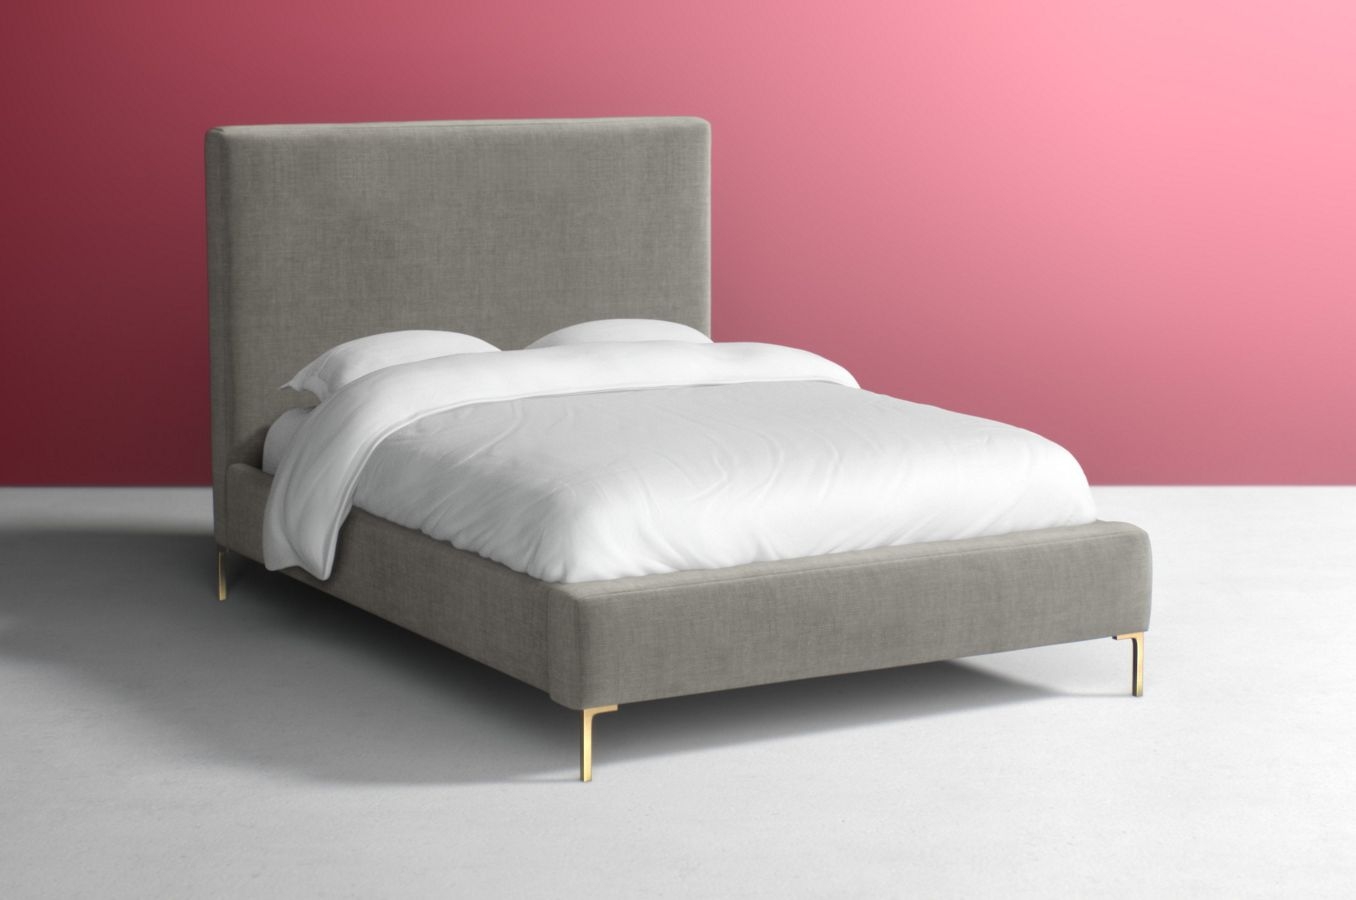 Edlyn Bed Queen - Brushed Cotton in Pebble, Brass Leg - Image 0